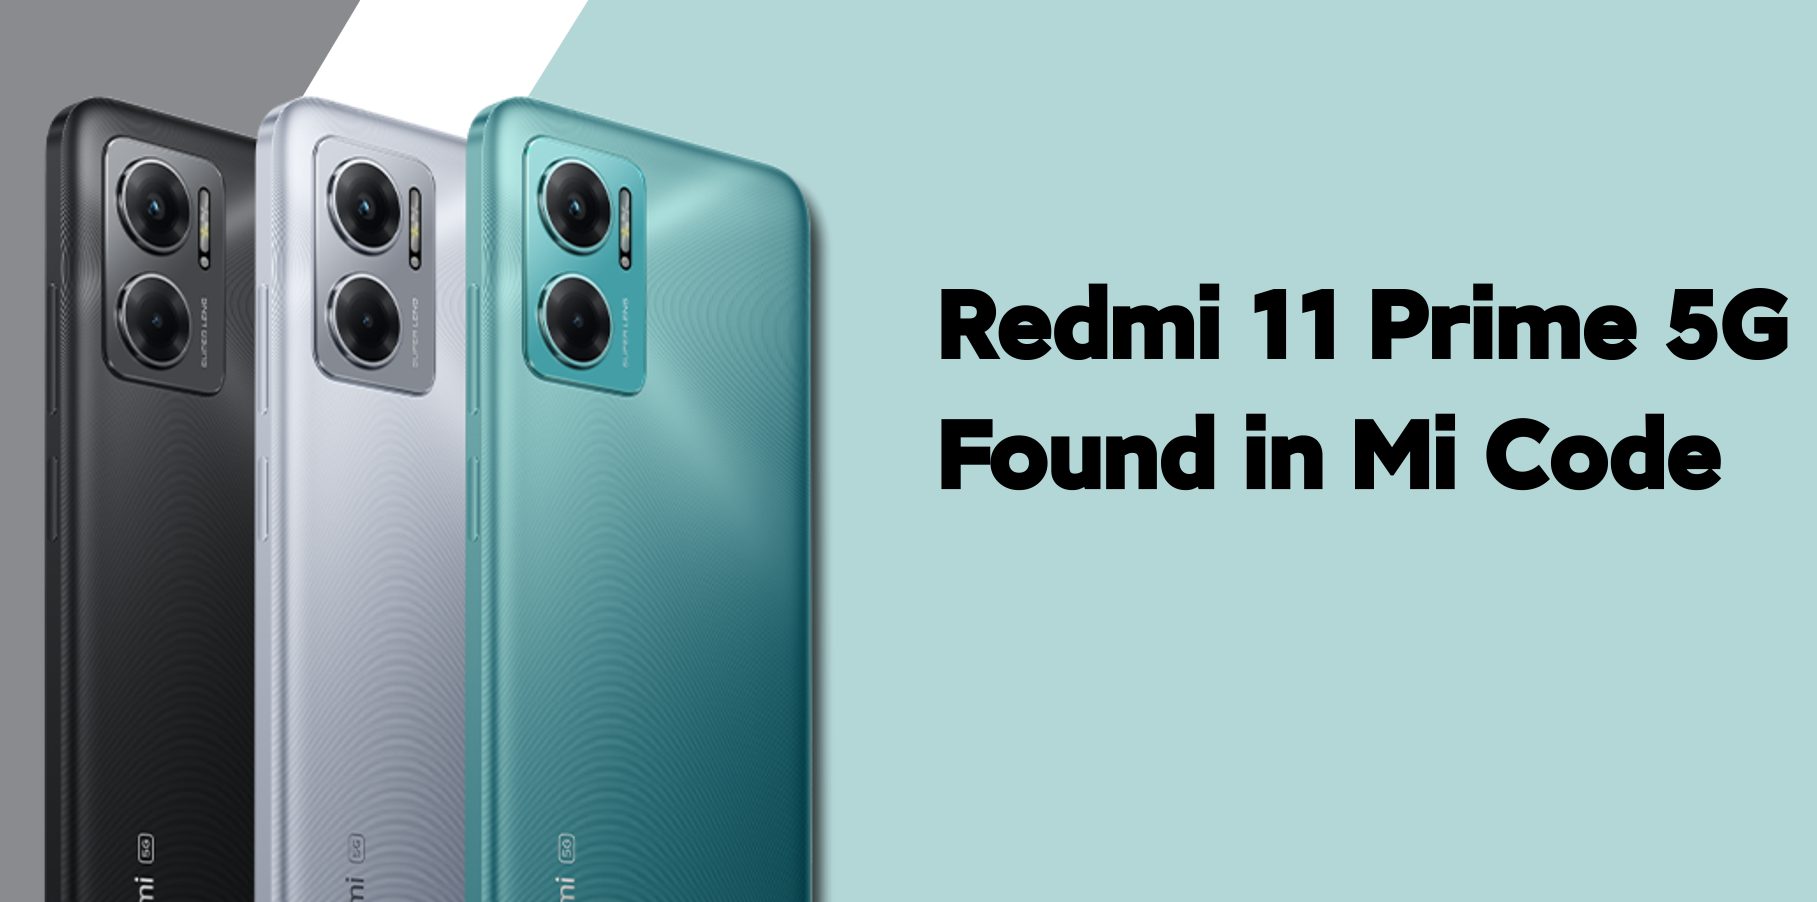 Stay Connected and Stimulated with Redmi 11 Prime 5G – The Ultimate Device for Adult Entertainment!